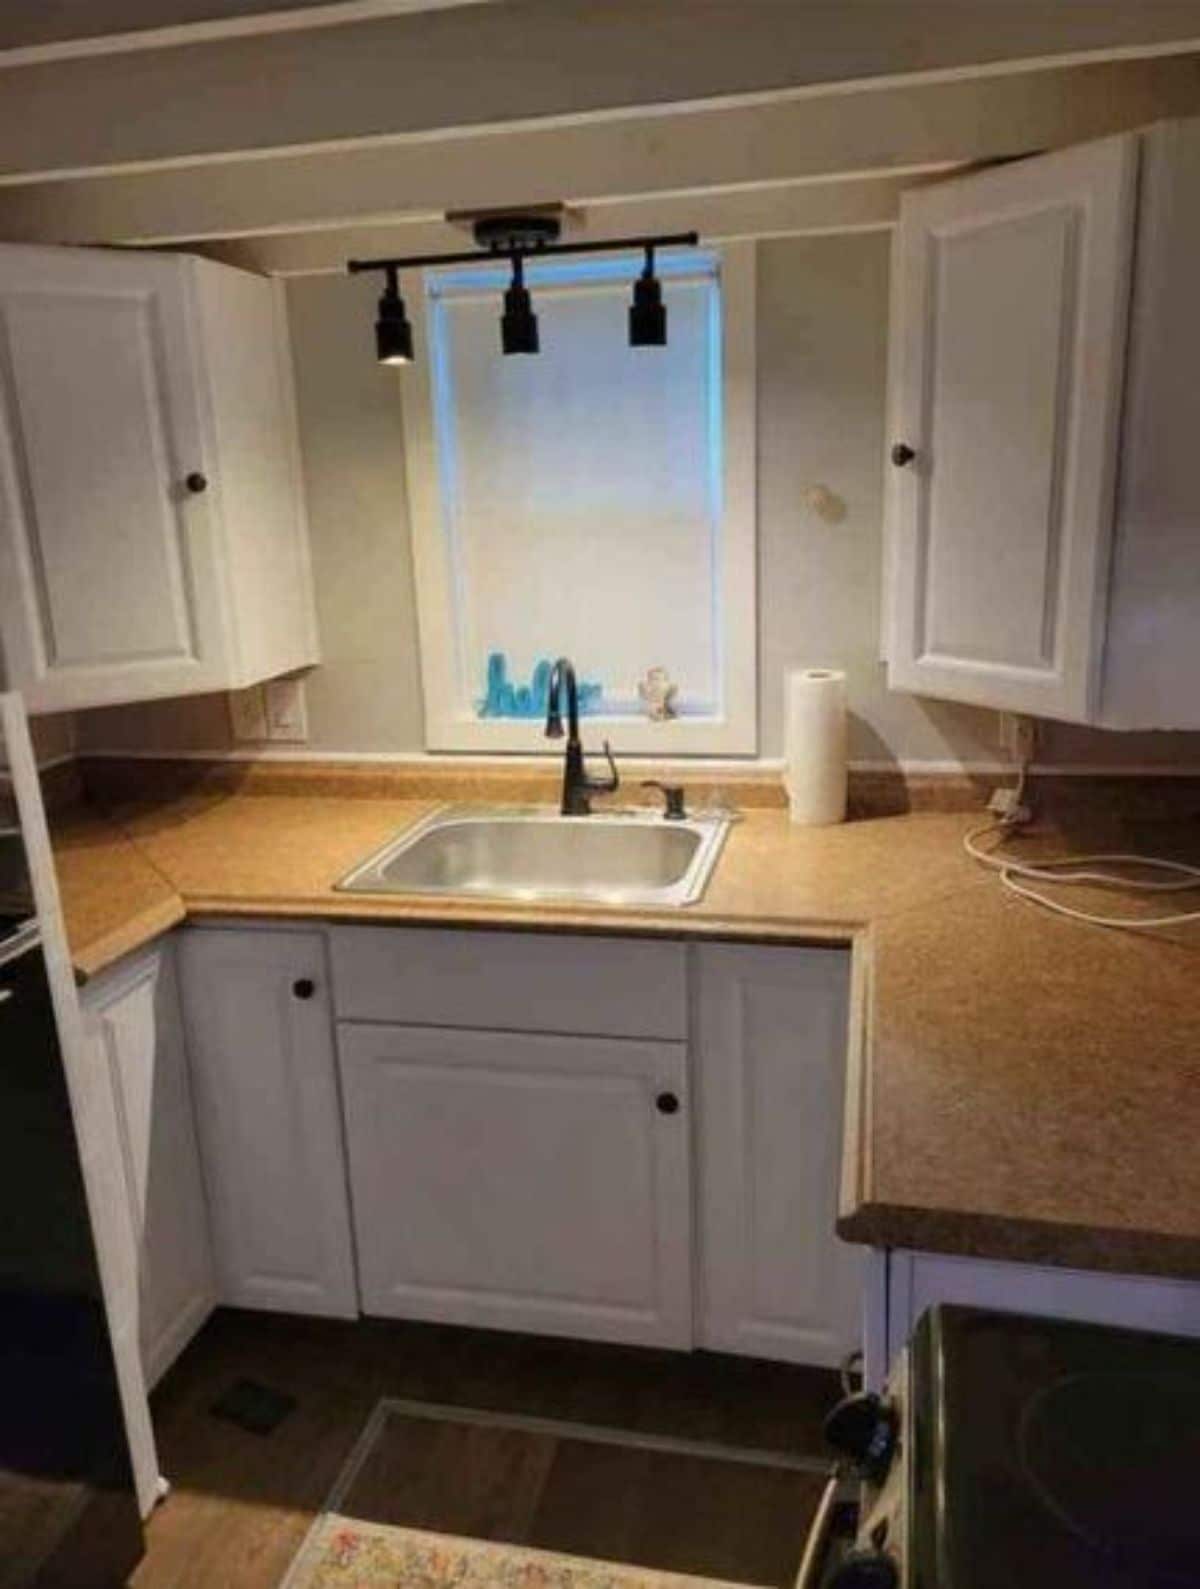 Kitchen area of 20’ Tiny House has a sink in the middle